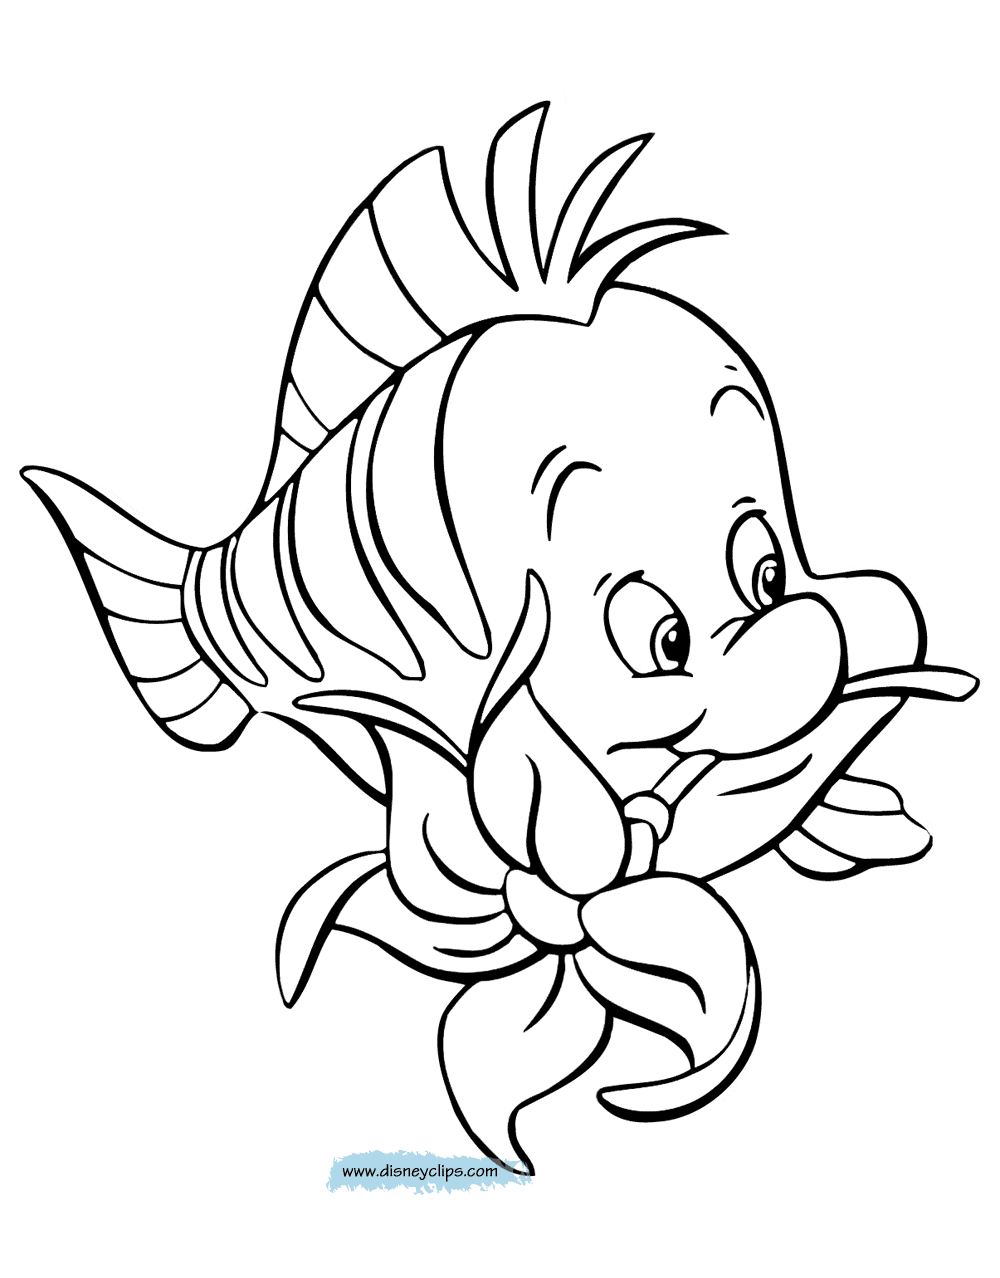 little mermaid color pages the little mermaid coloring pages 2 disneyclipscom color mermaid little pages 